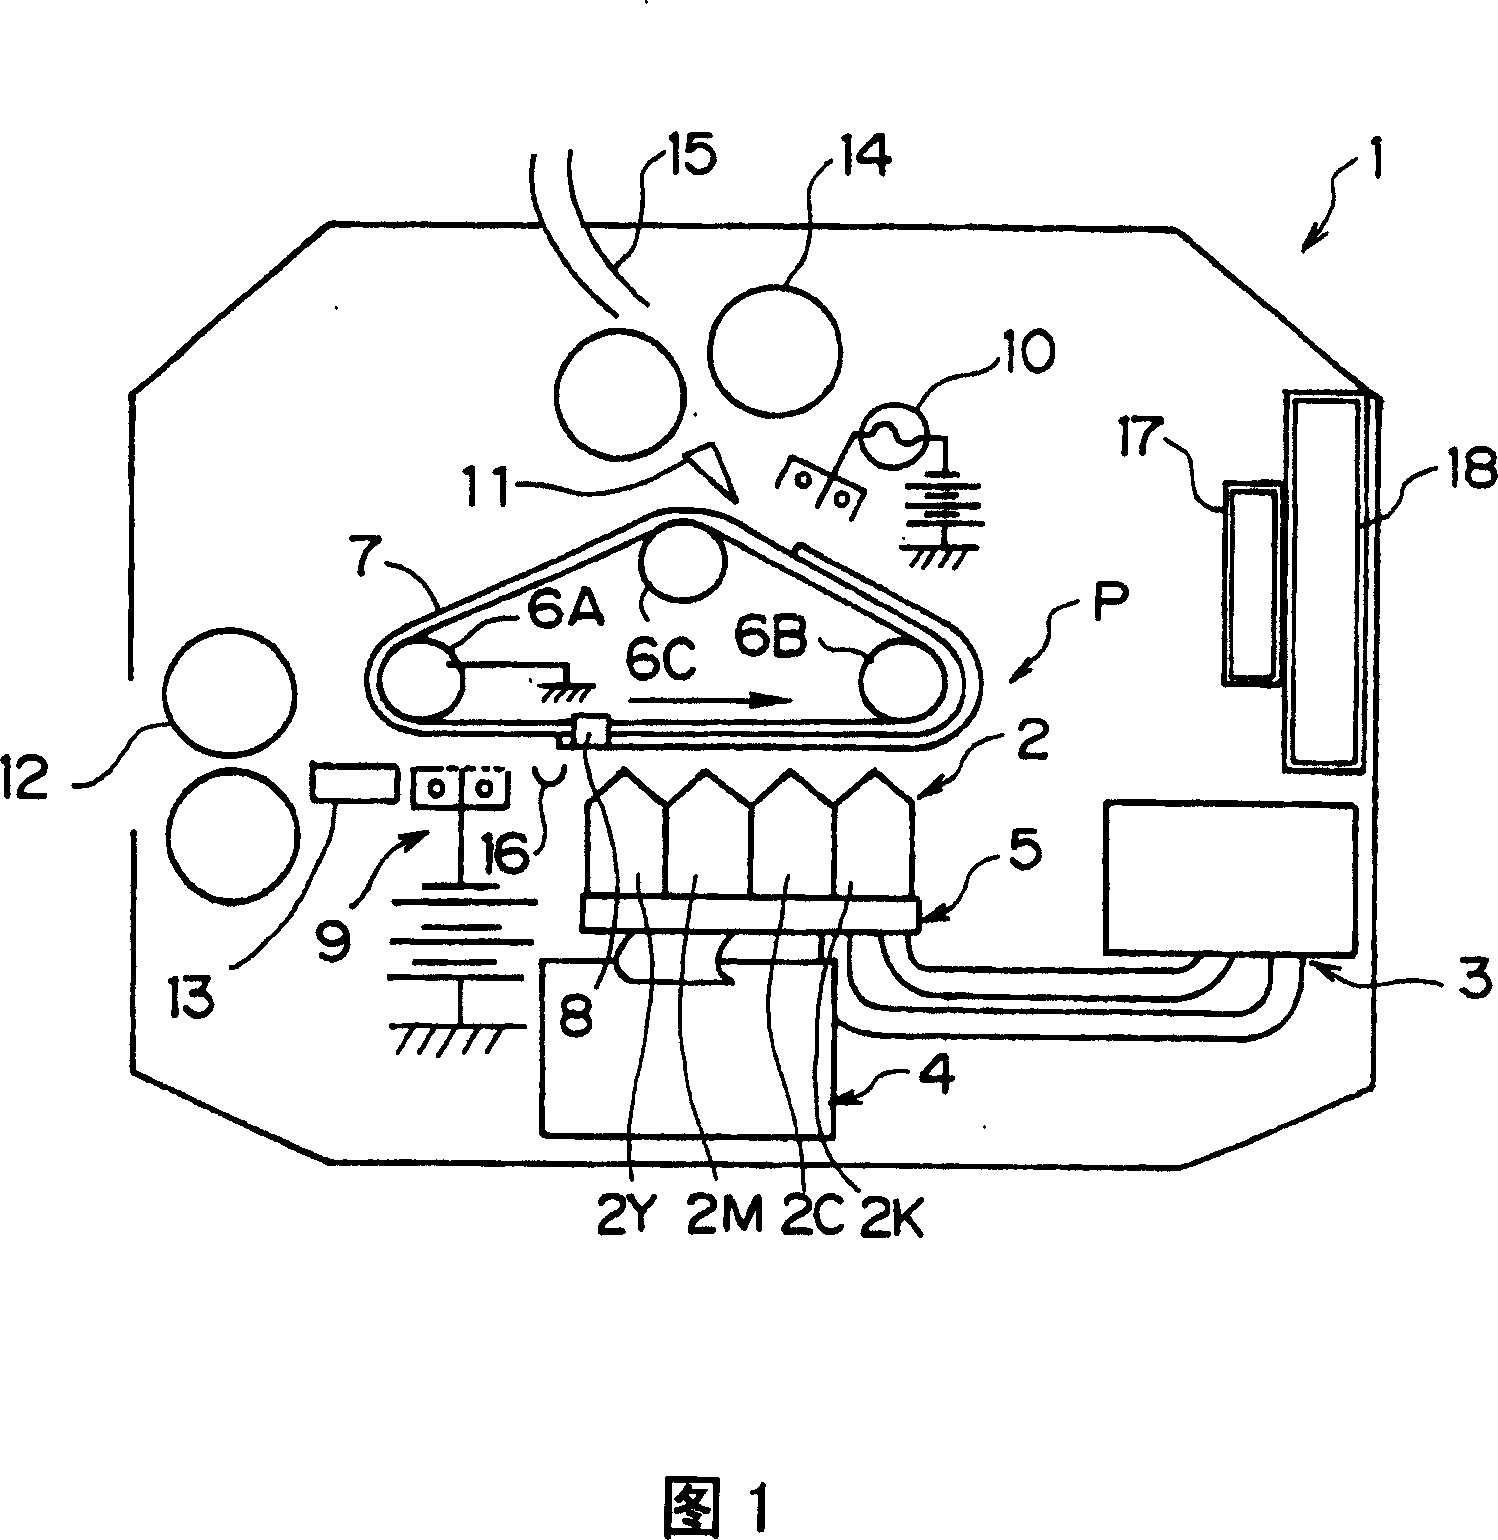 Ink-jet recording device and recording method